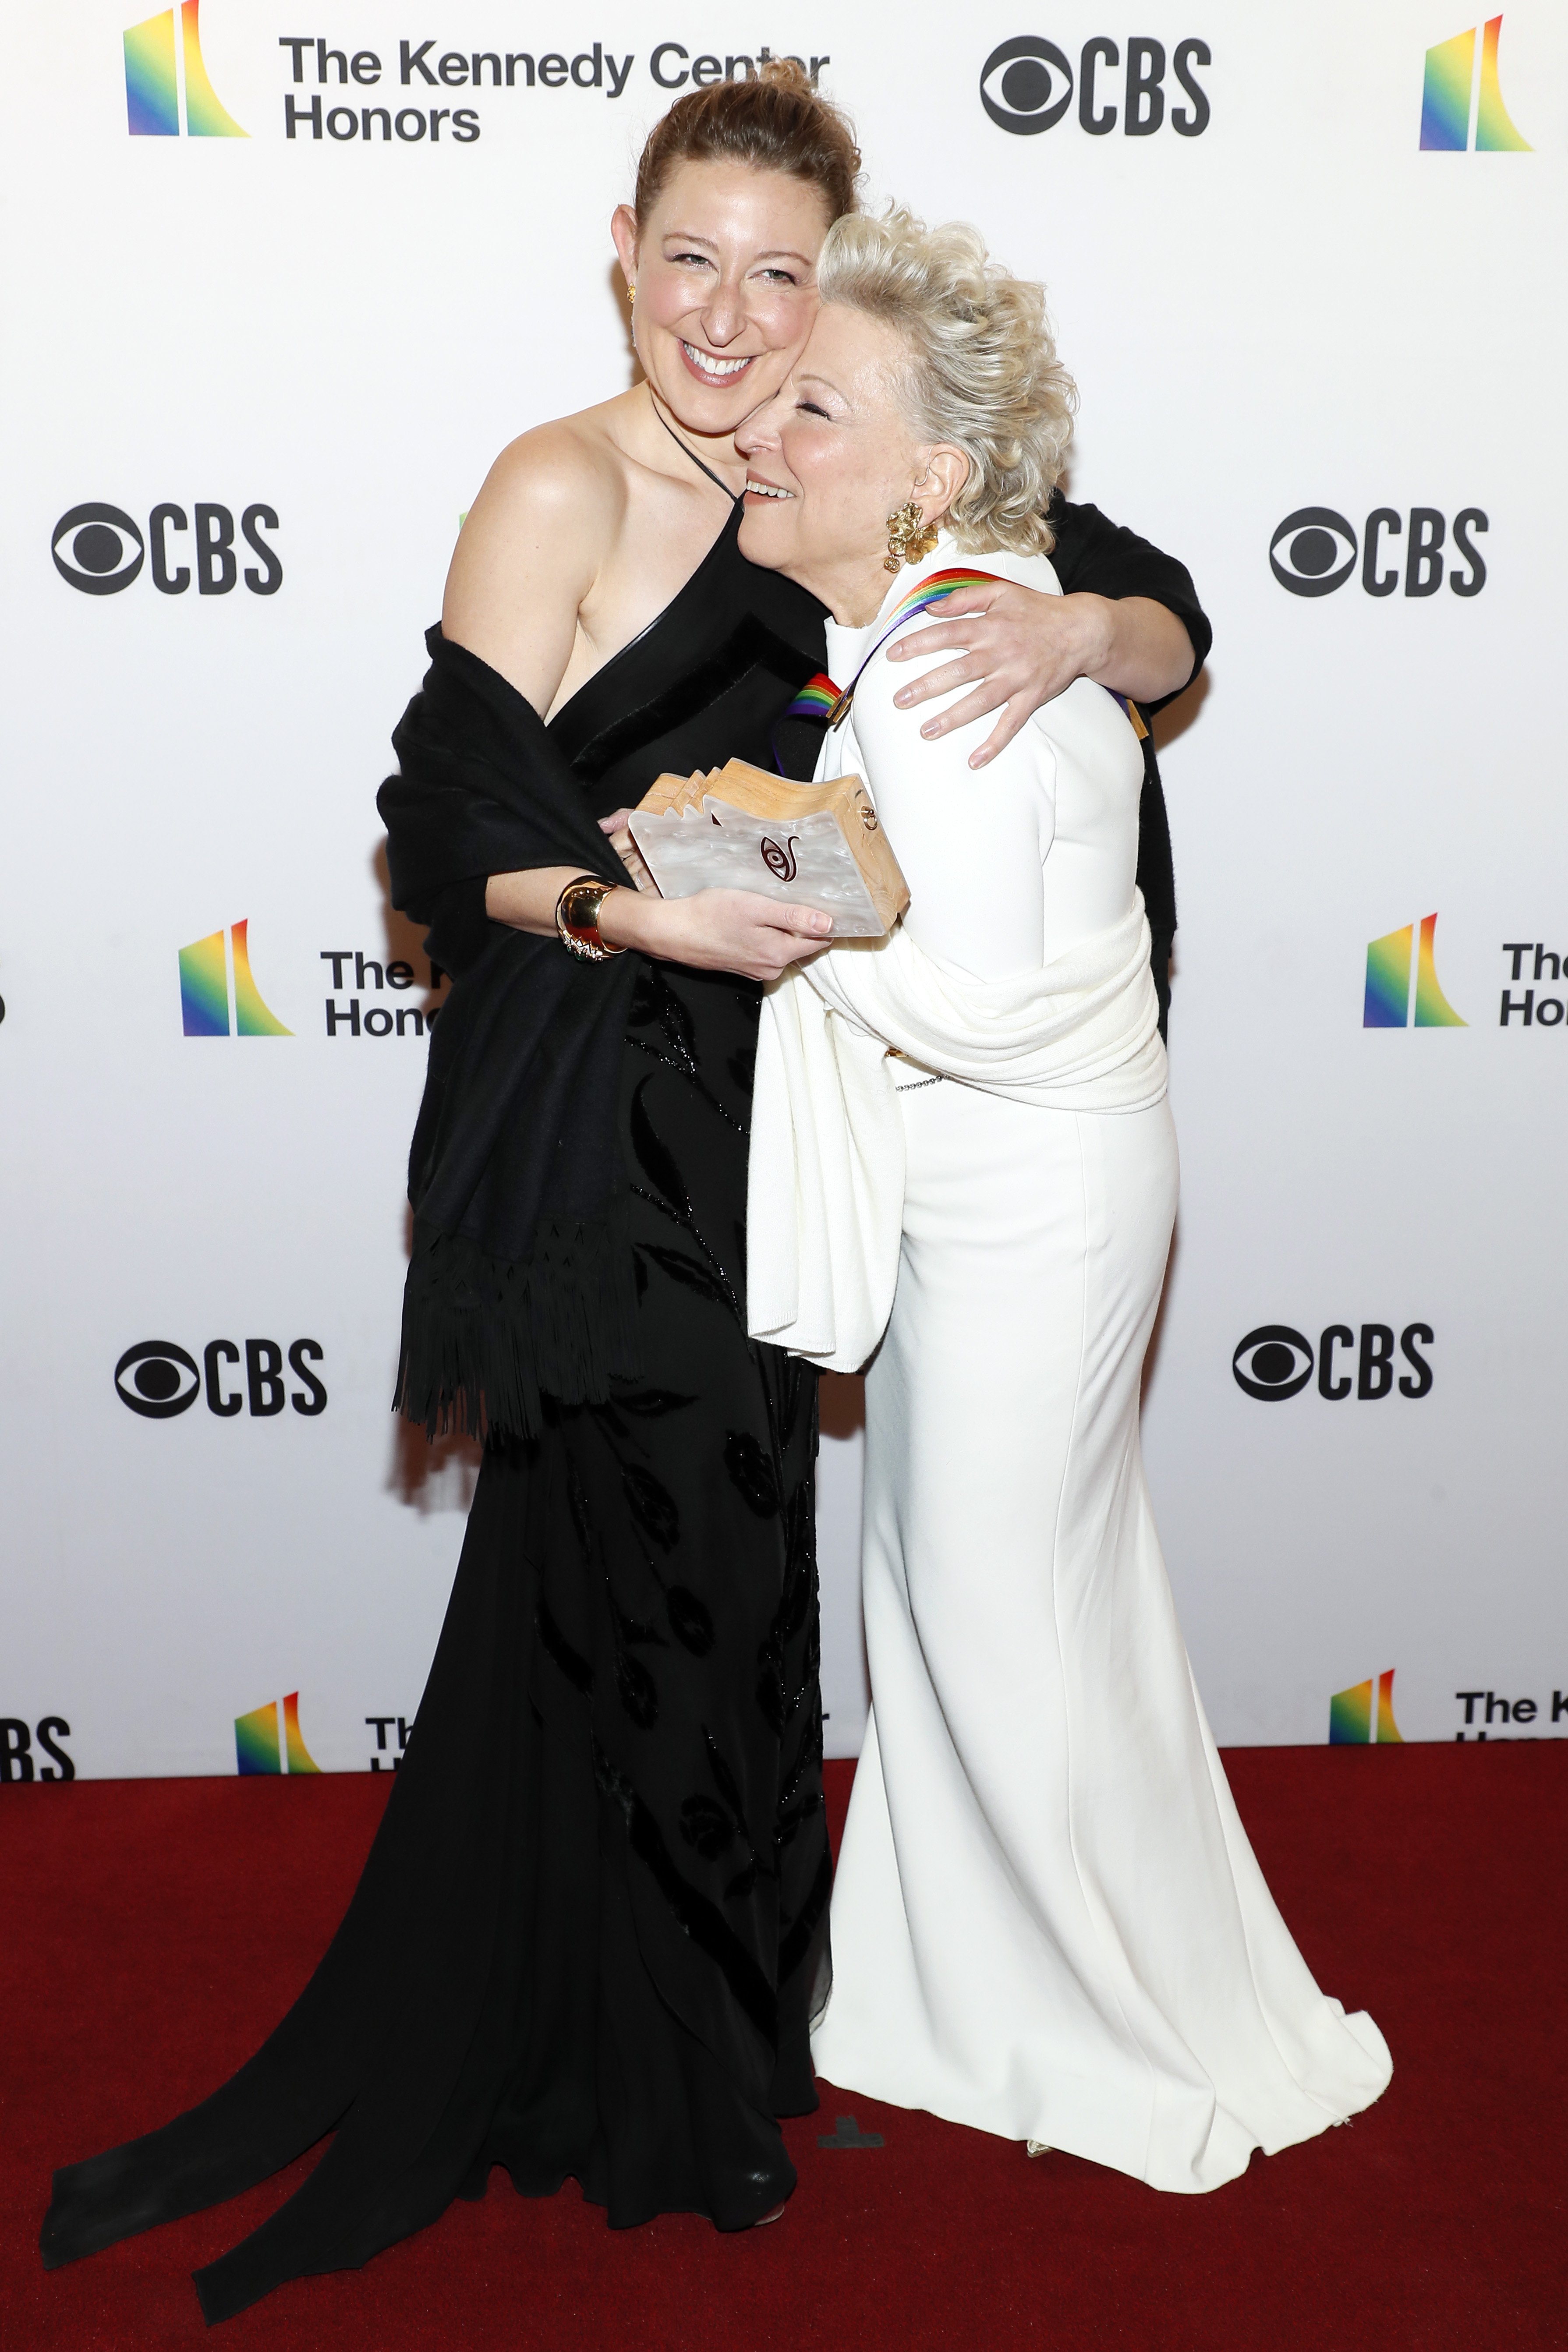 Honoree Bette Midler and daughter Sophie Von Haselberg attend the 44th Kennedy Center Honors on December 05, 2021 in Washington, DC. | Source: Getty Images